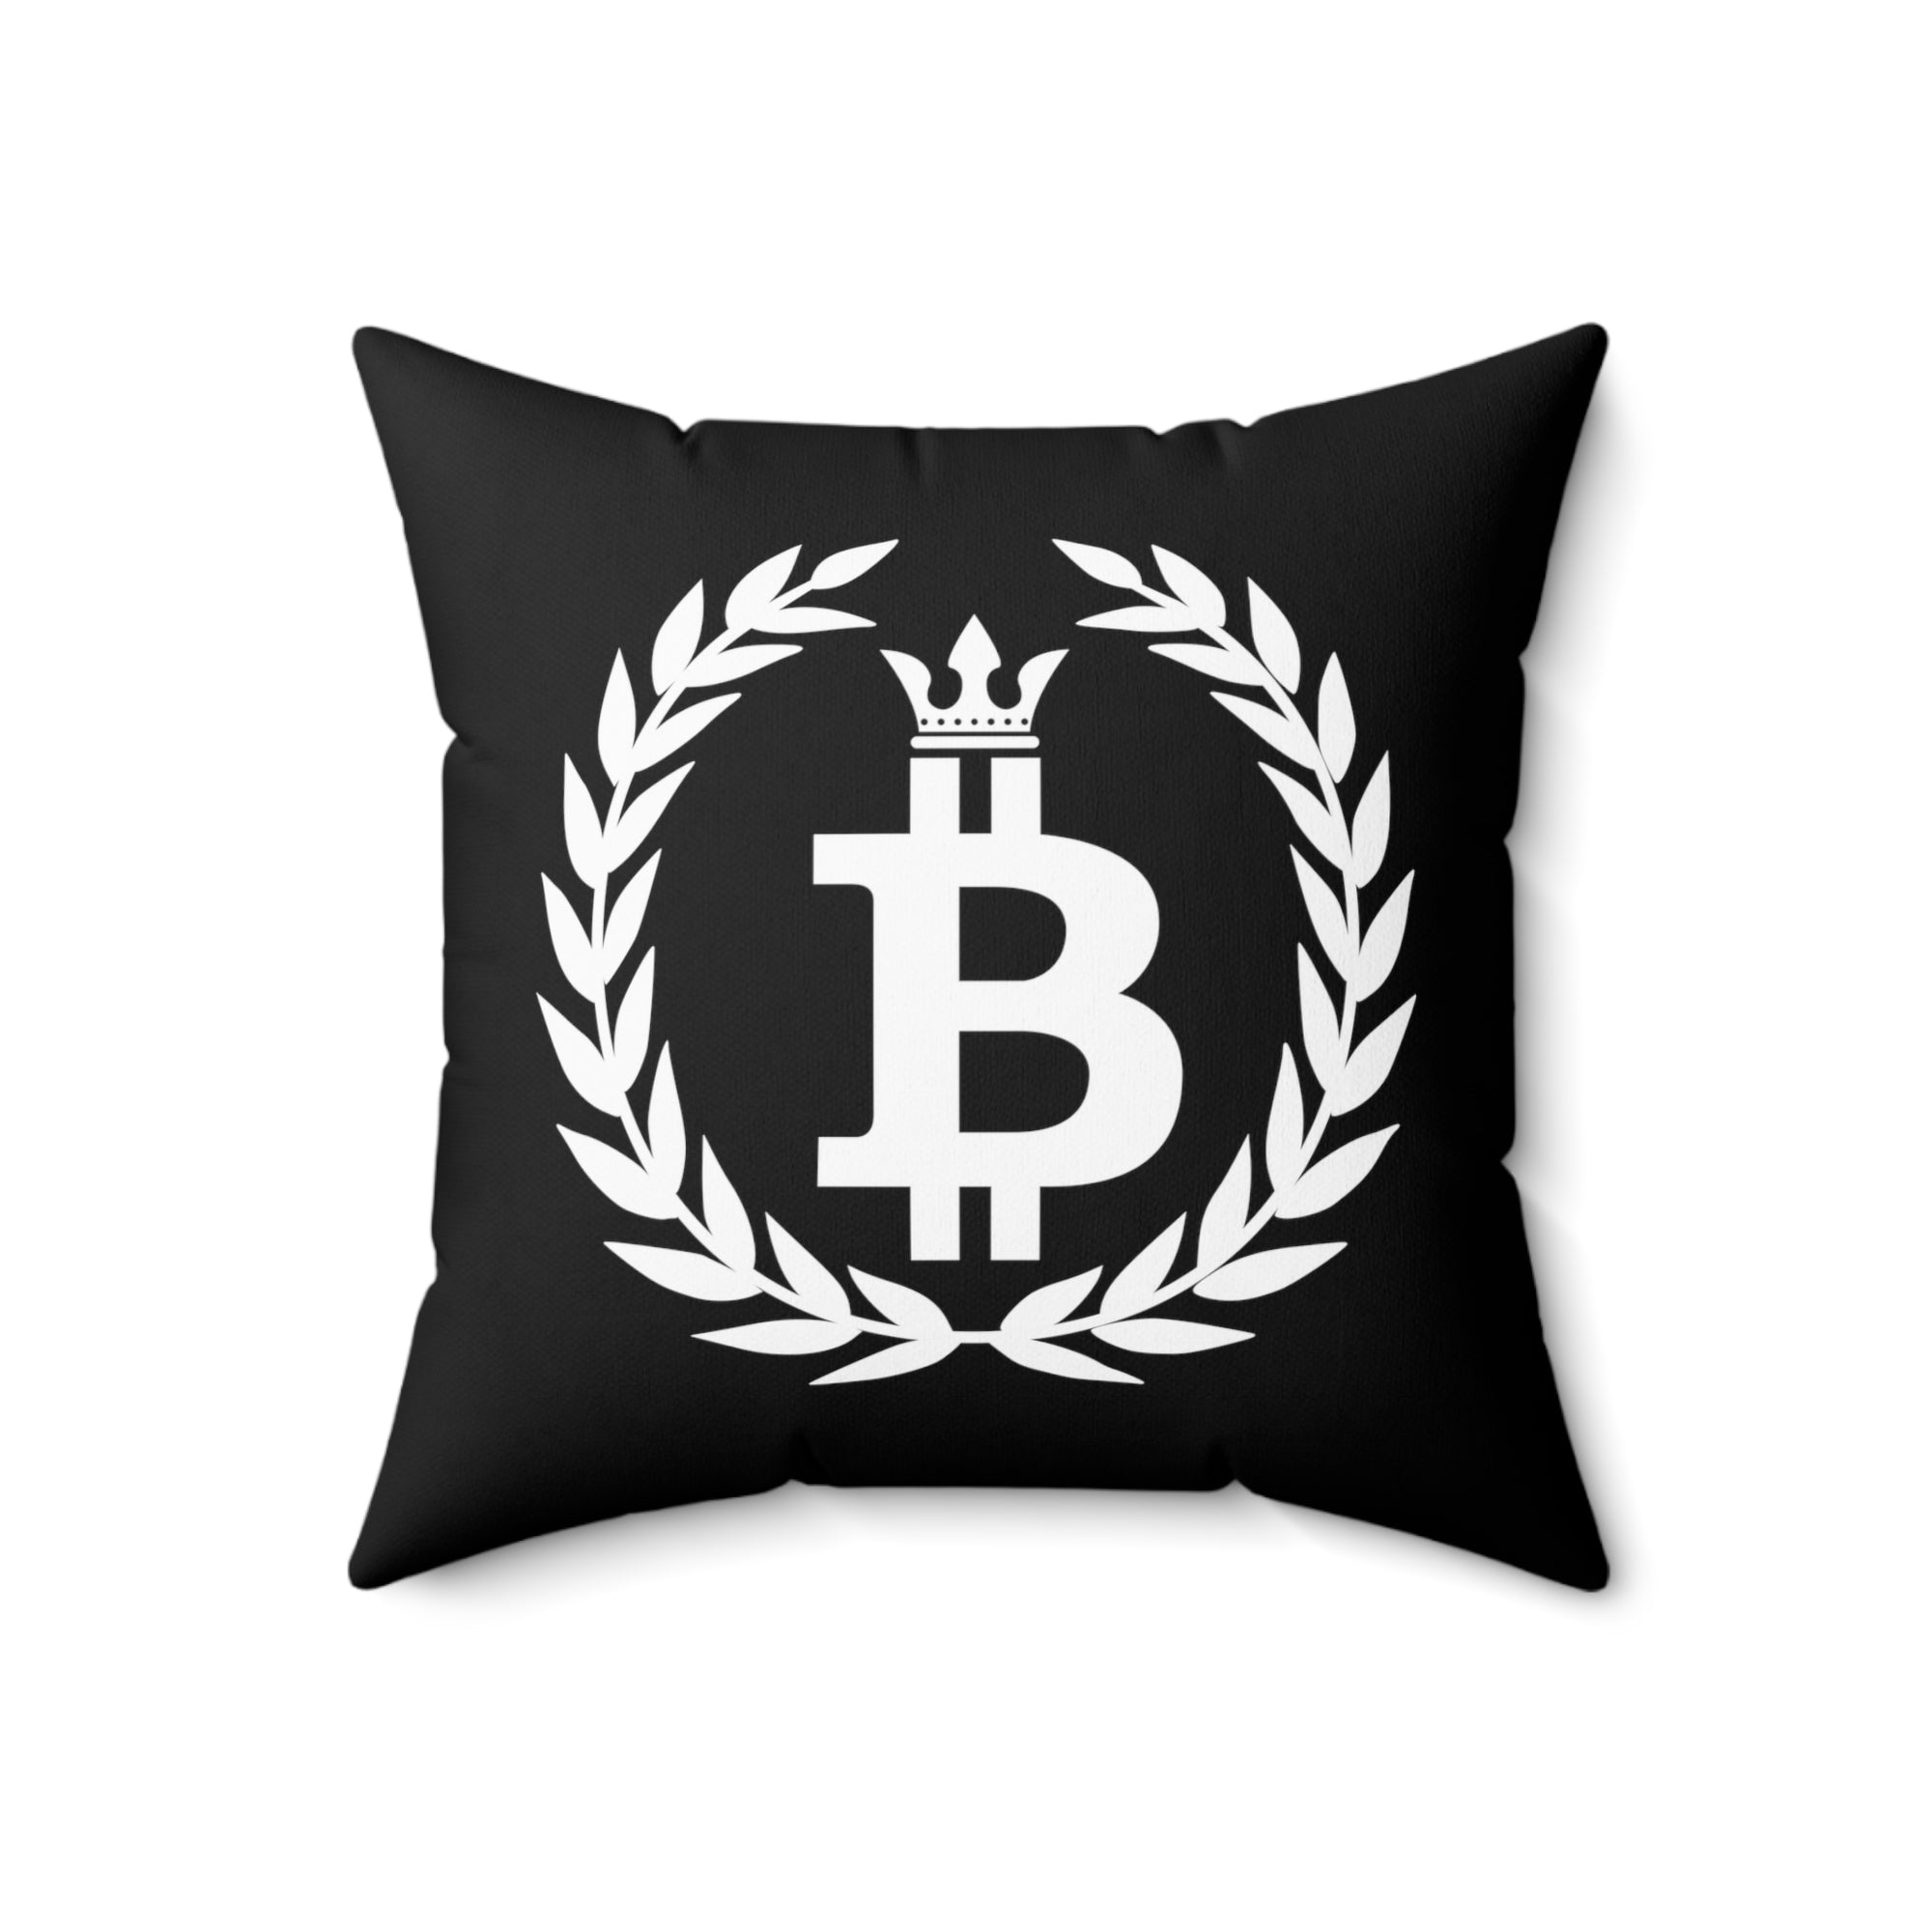 Cryptocurrency Gift Ideas - Bitcoin Dominance Pillow. Close Up View.